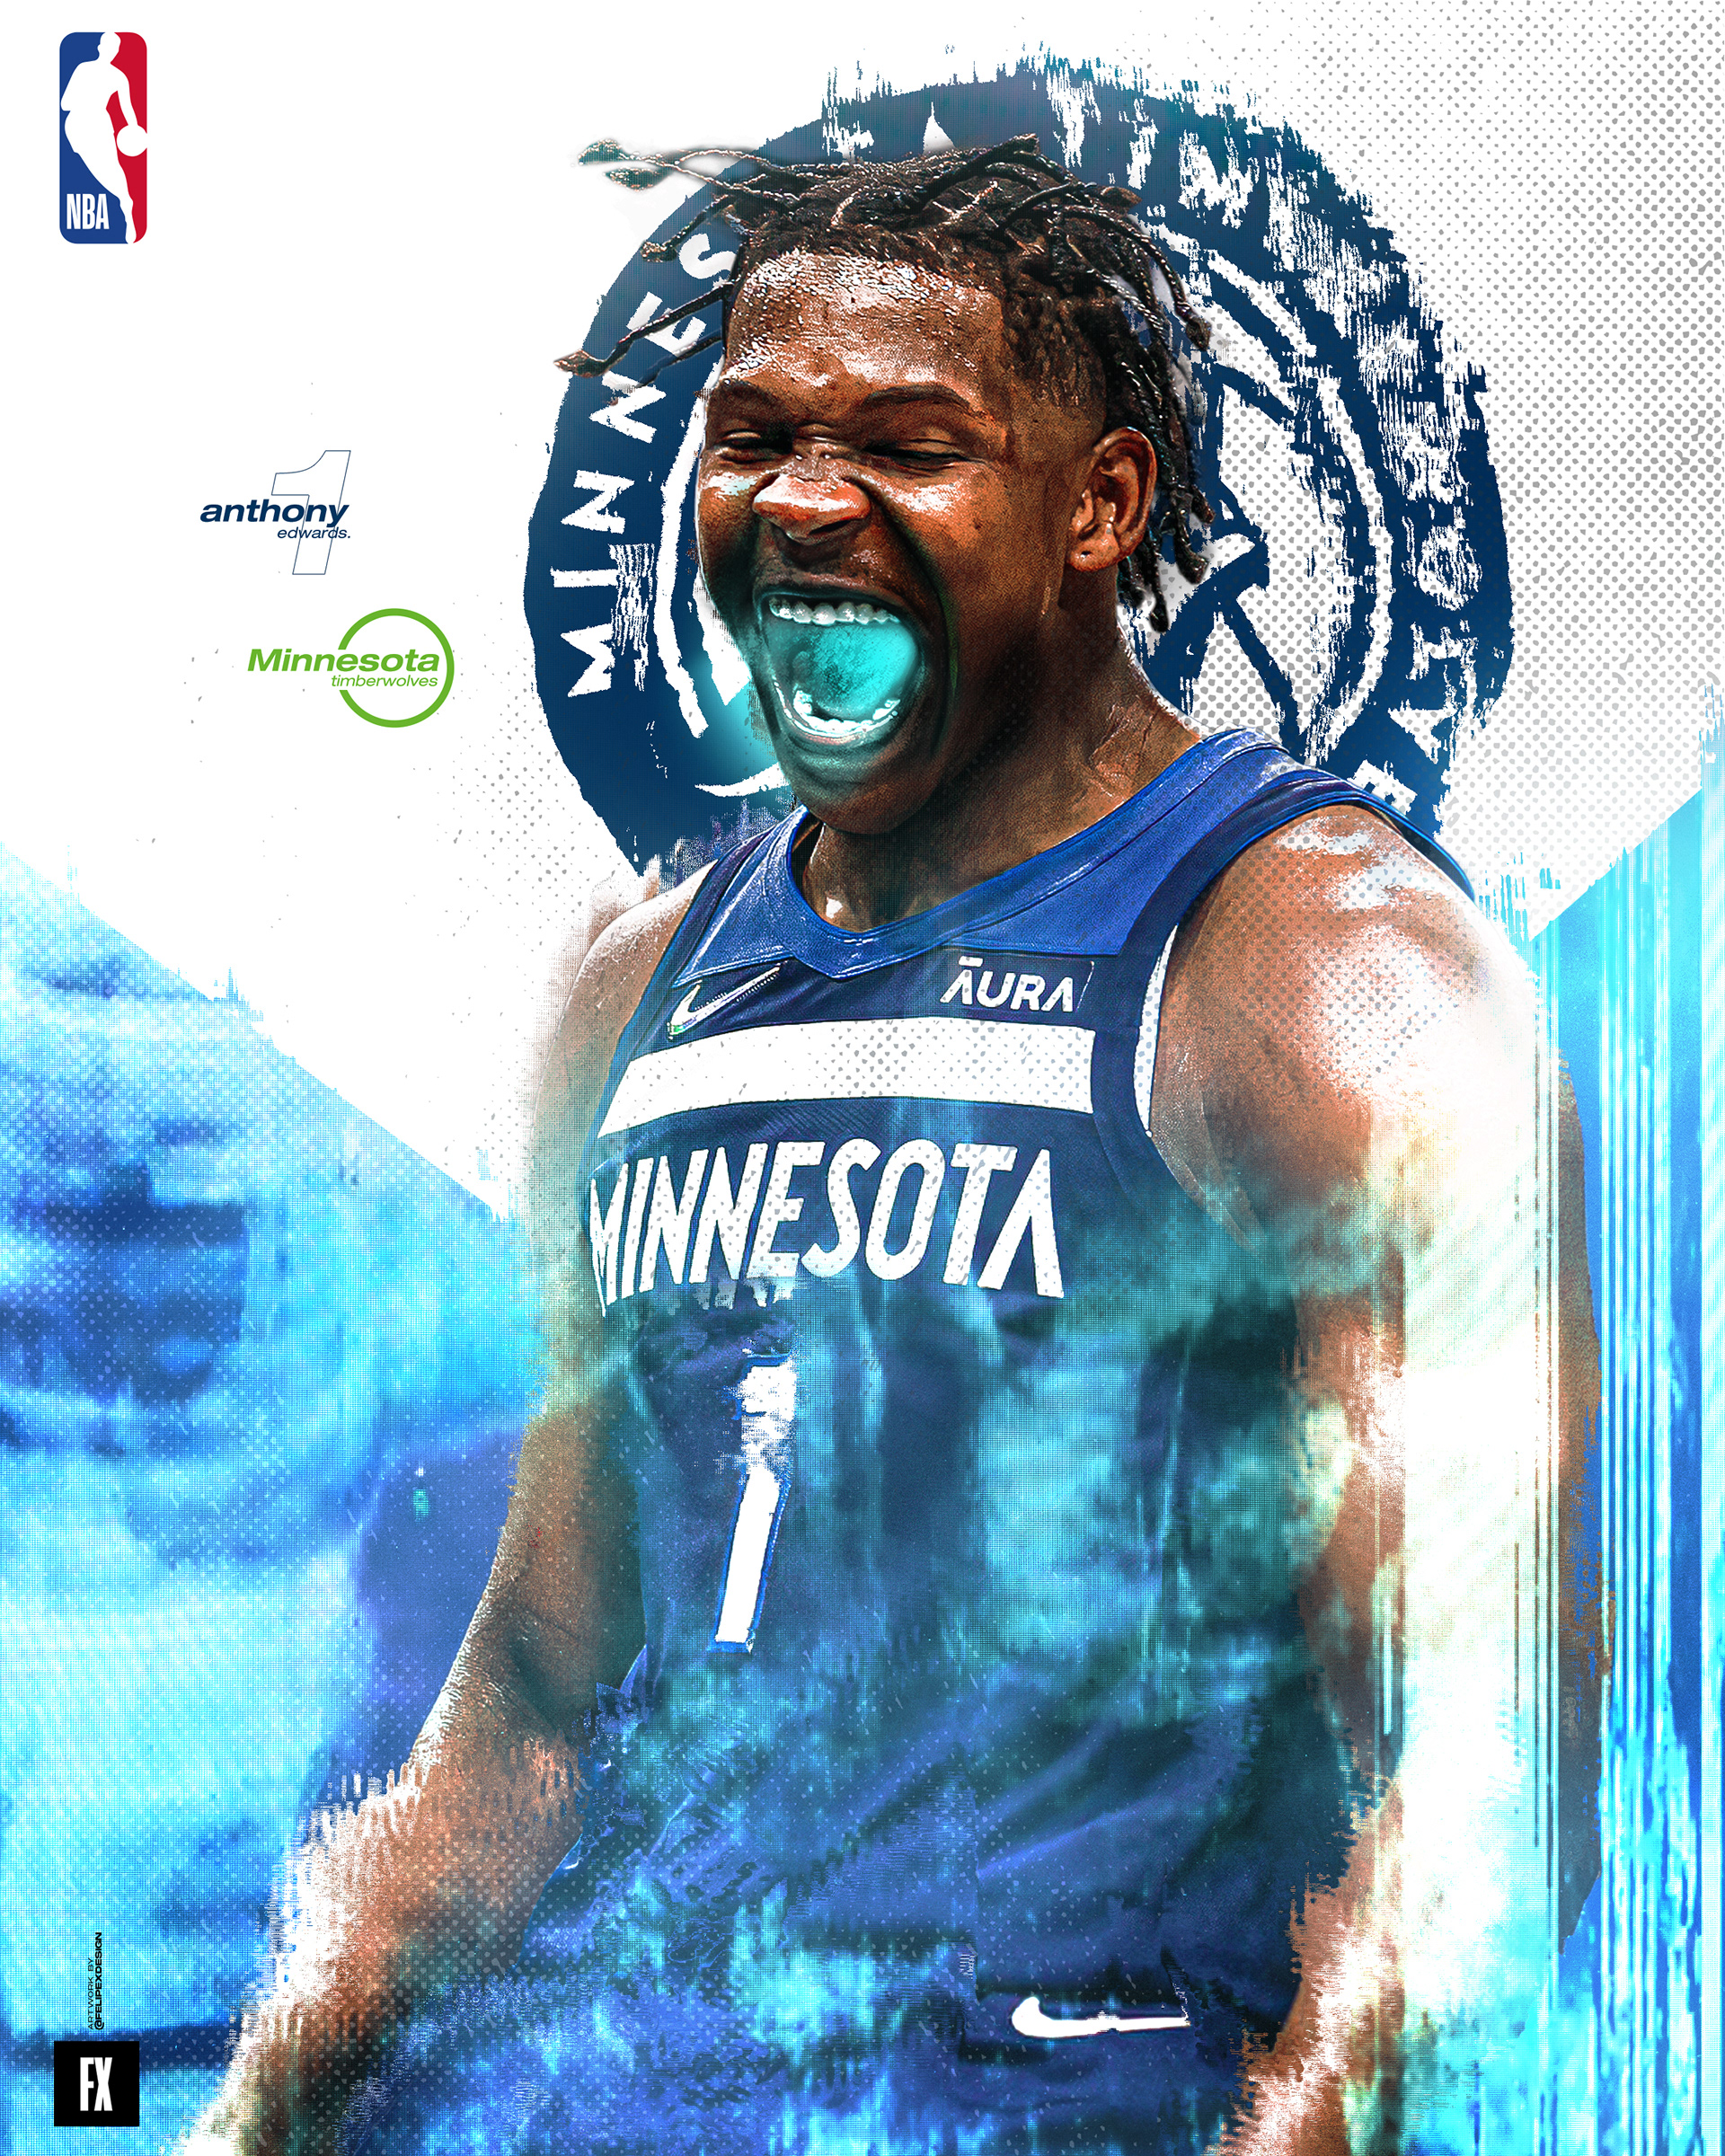 🔥 Download Anthony Edwards Minnesota Timberwolves by dhardy27